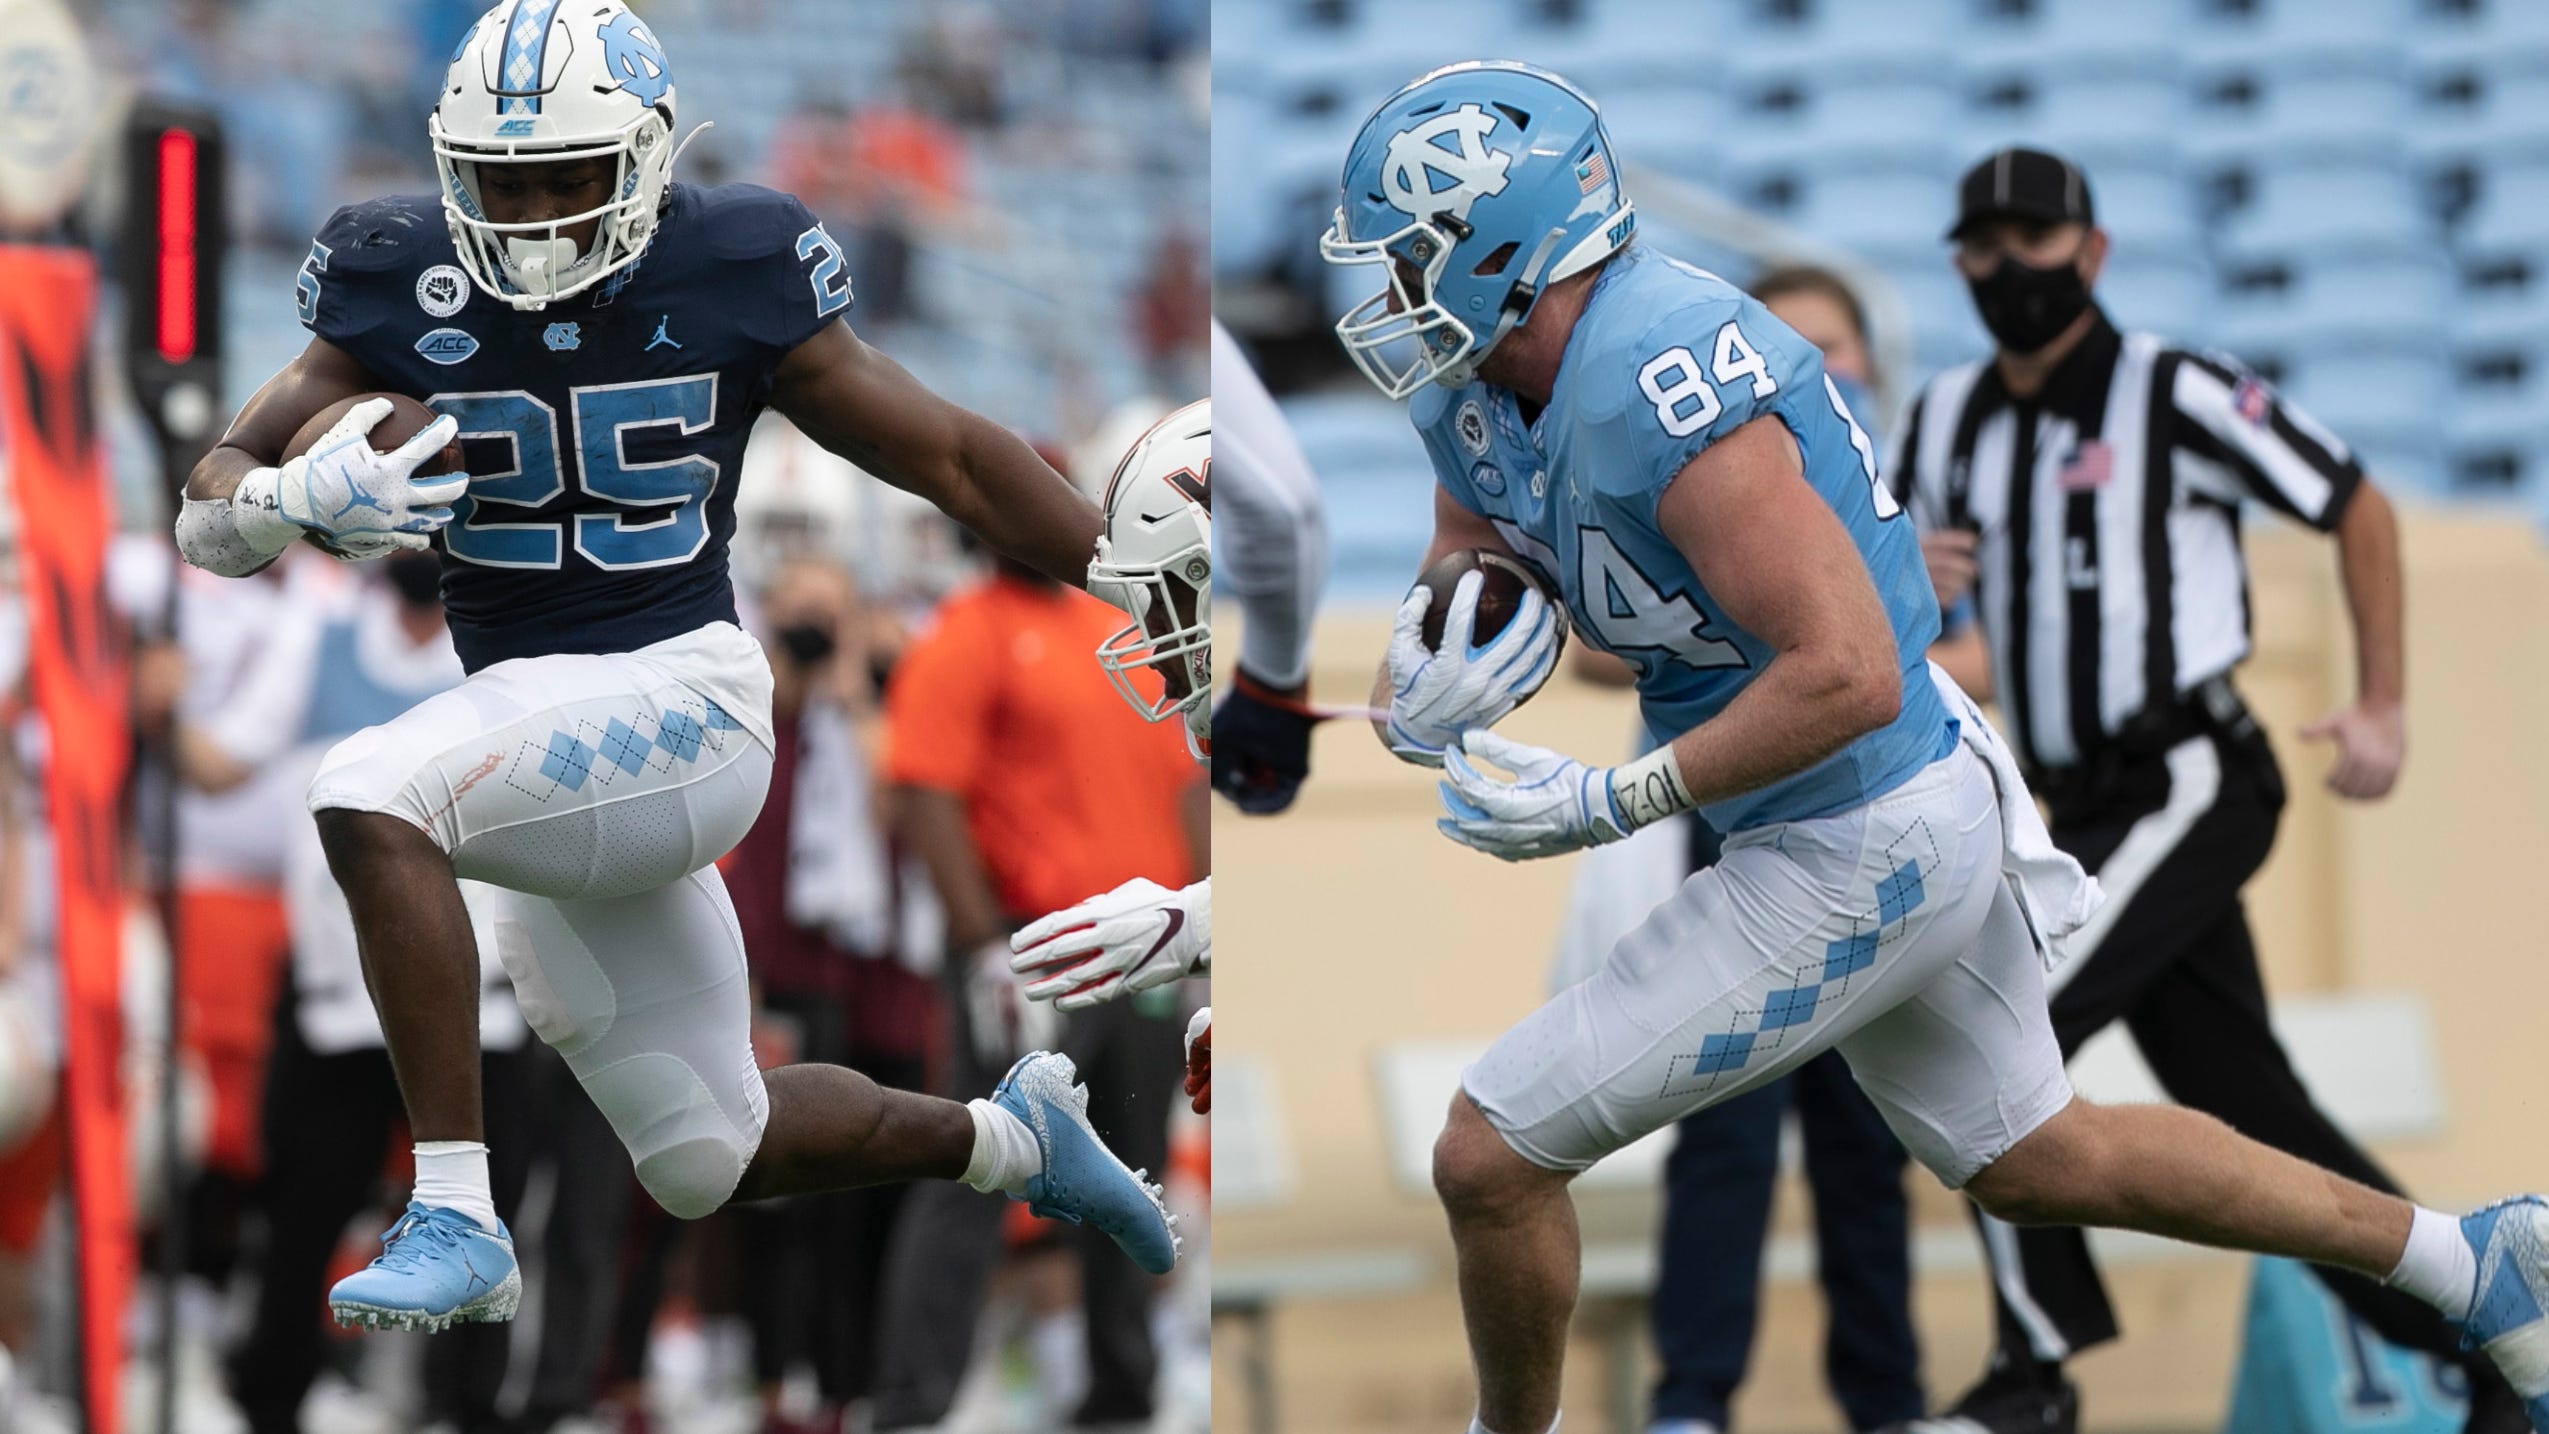 Wilmington-area stars Walston, Williams excited for historic edition of UNC vs. N.C. State